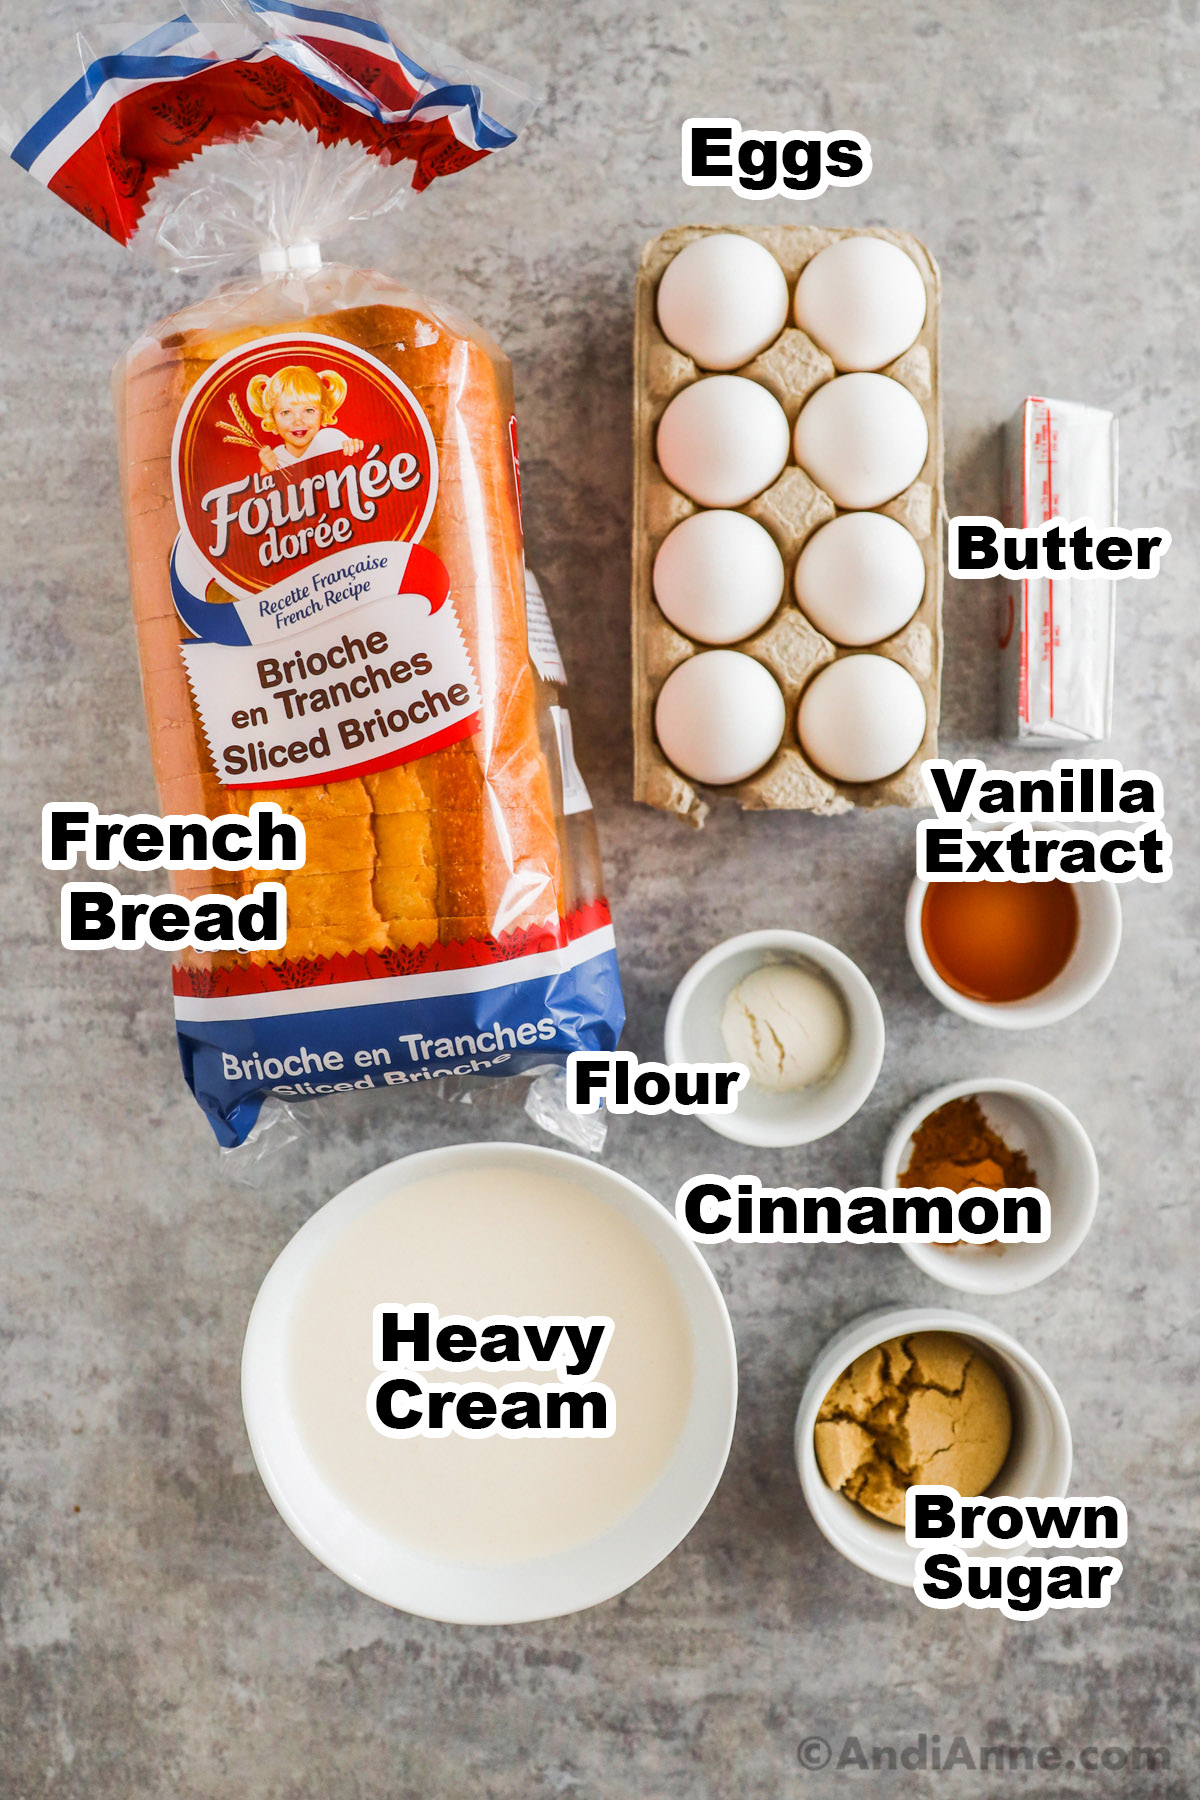 Recipe ingredients on the counter including a loaf of bread, eggs in a carton, stick of butter, and bowls of vanilla extract, flour, cinnamon, heavy cream and brown sugar.